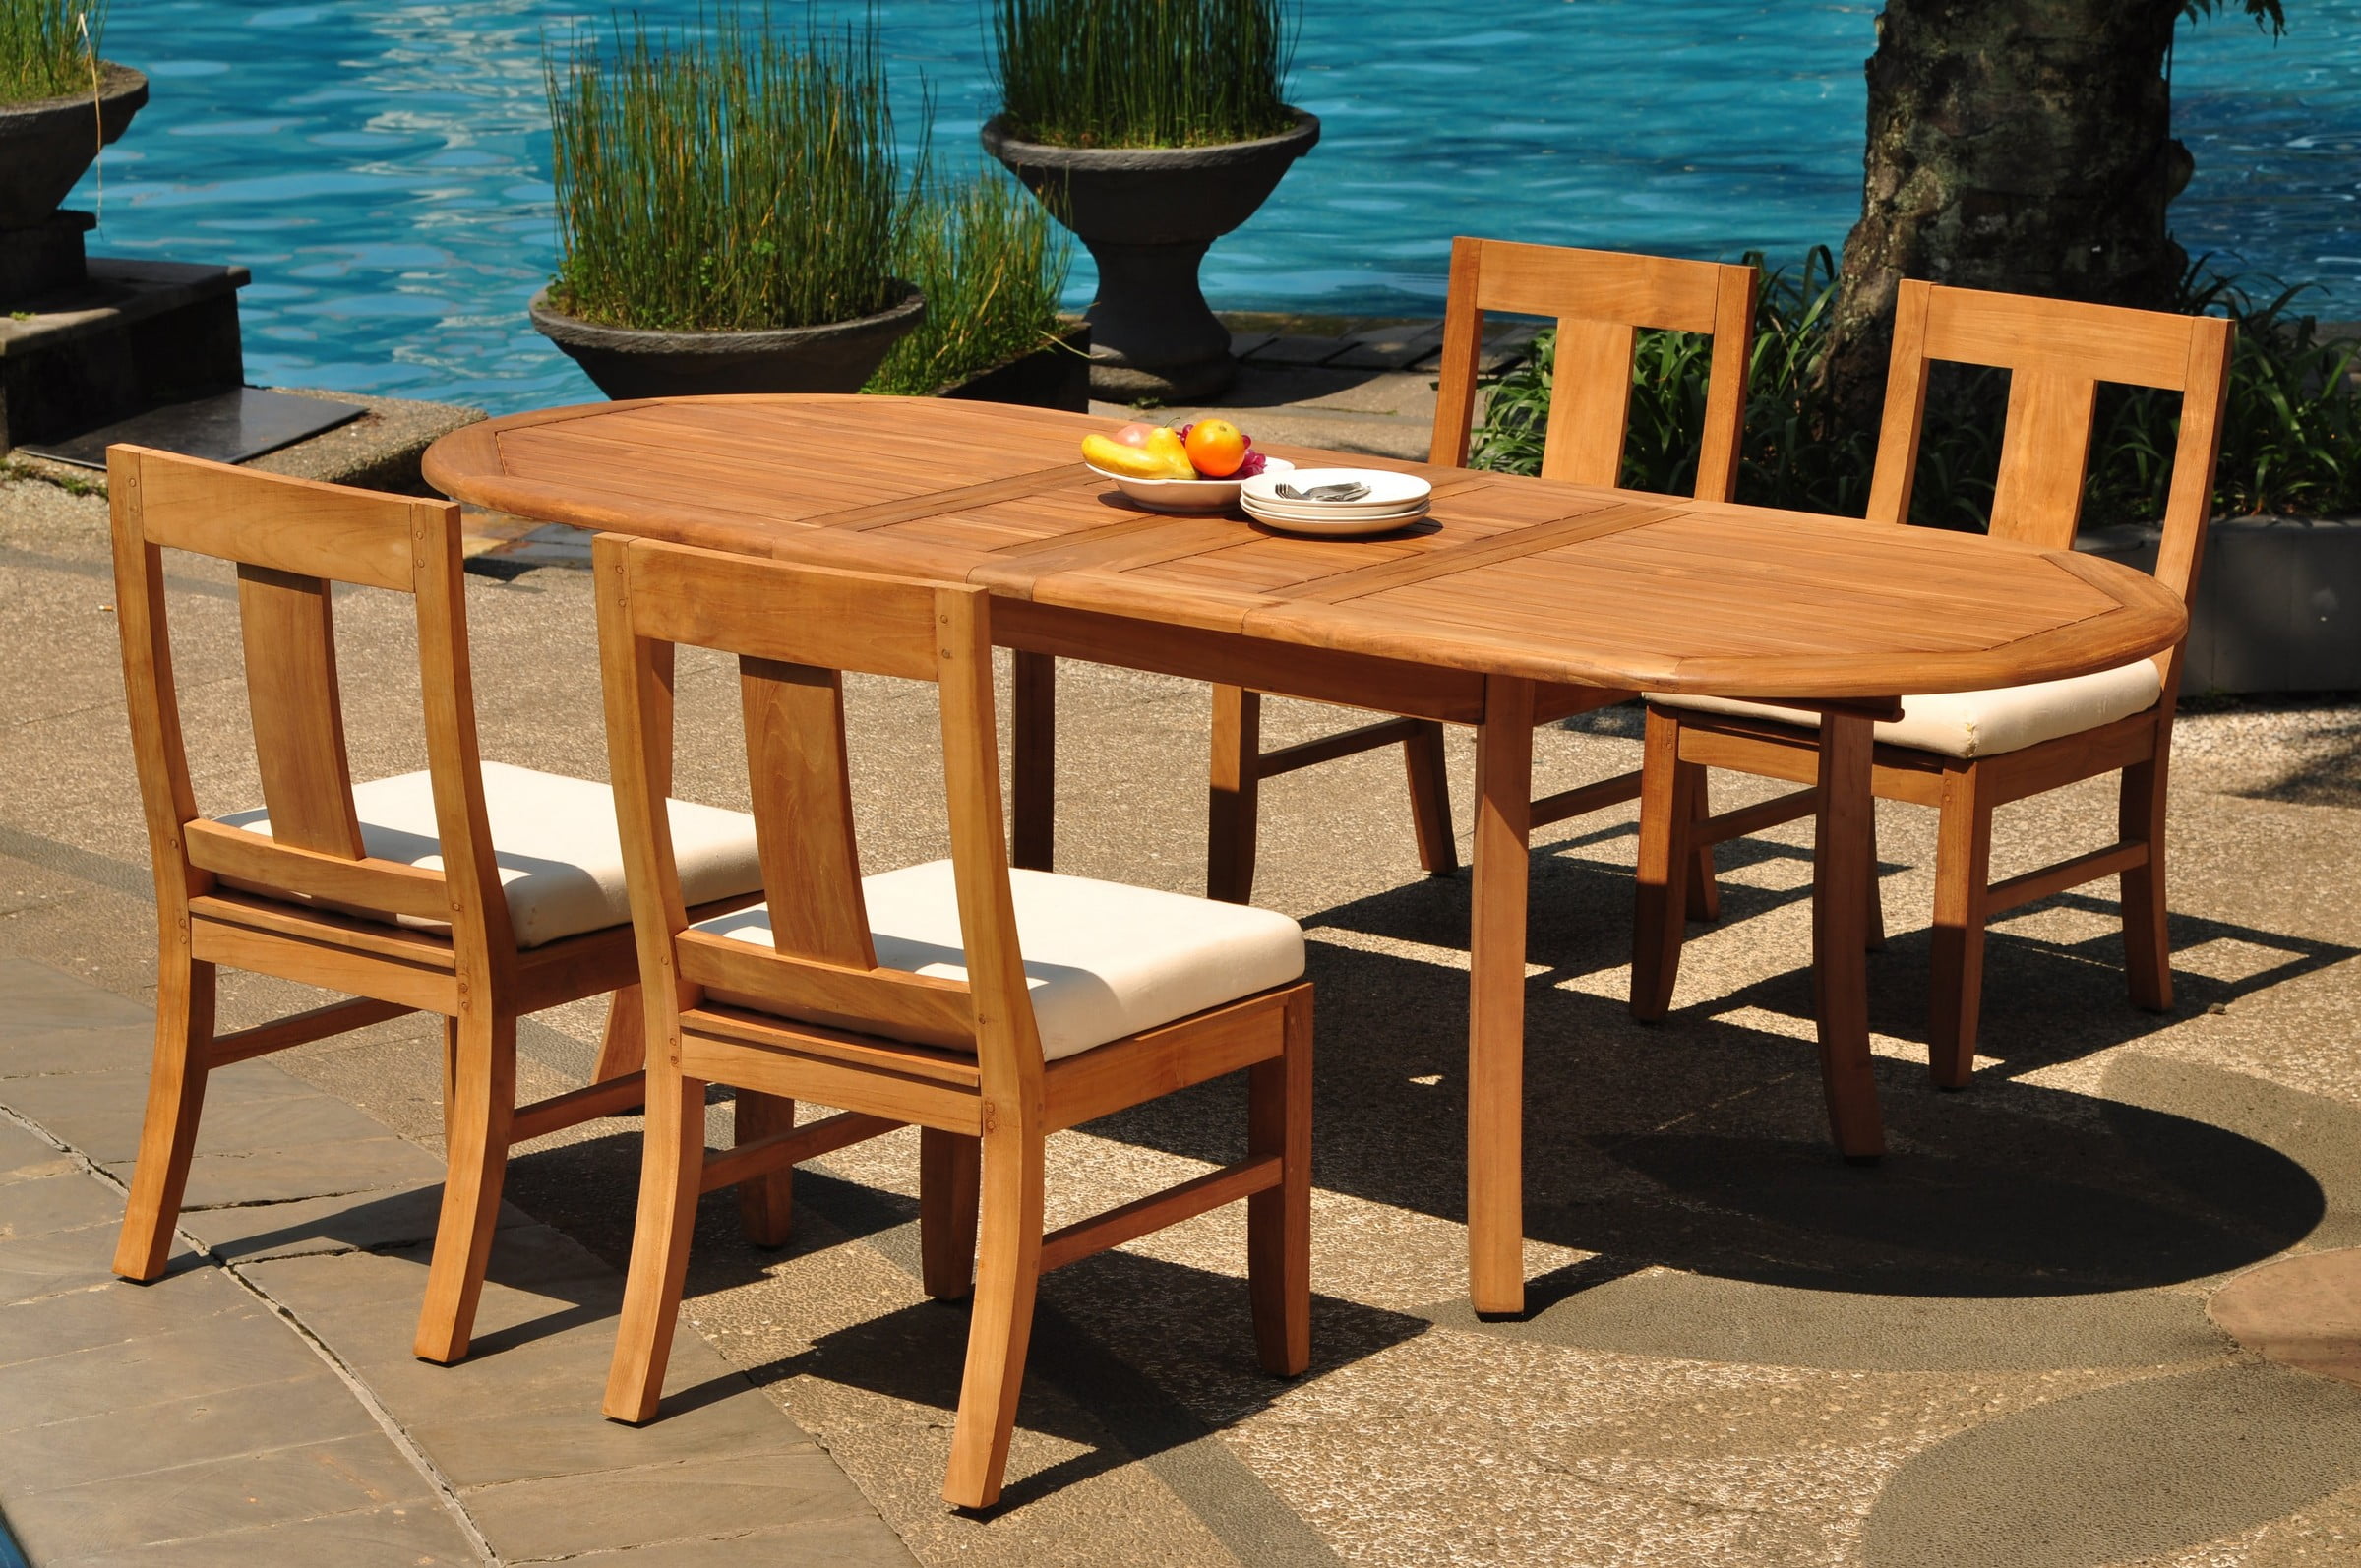 Teak Dining Table For Outdoor Use: Enjoy Alfresco Dining